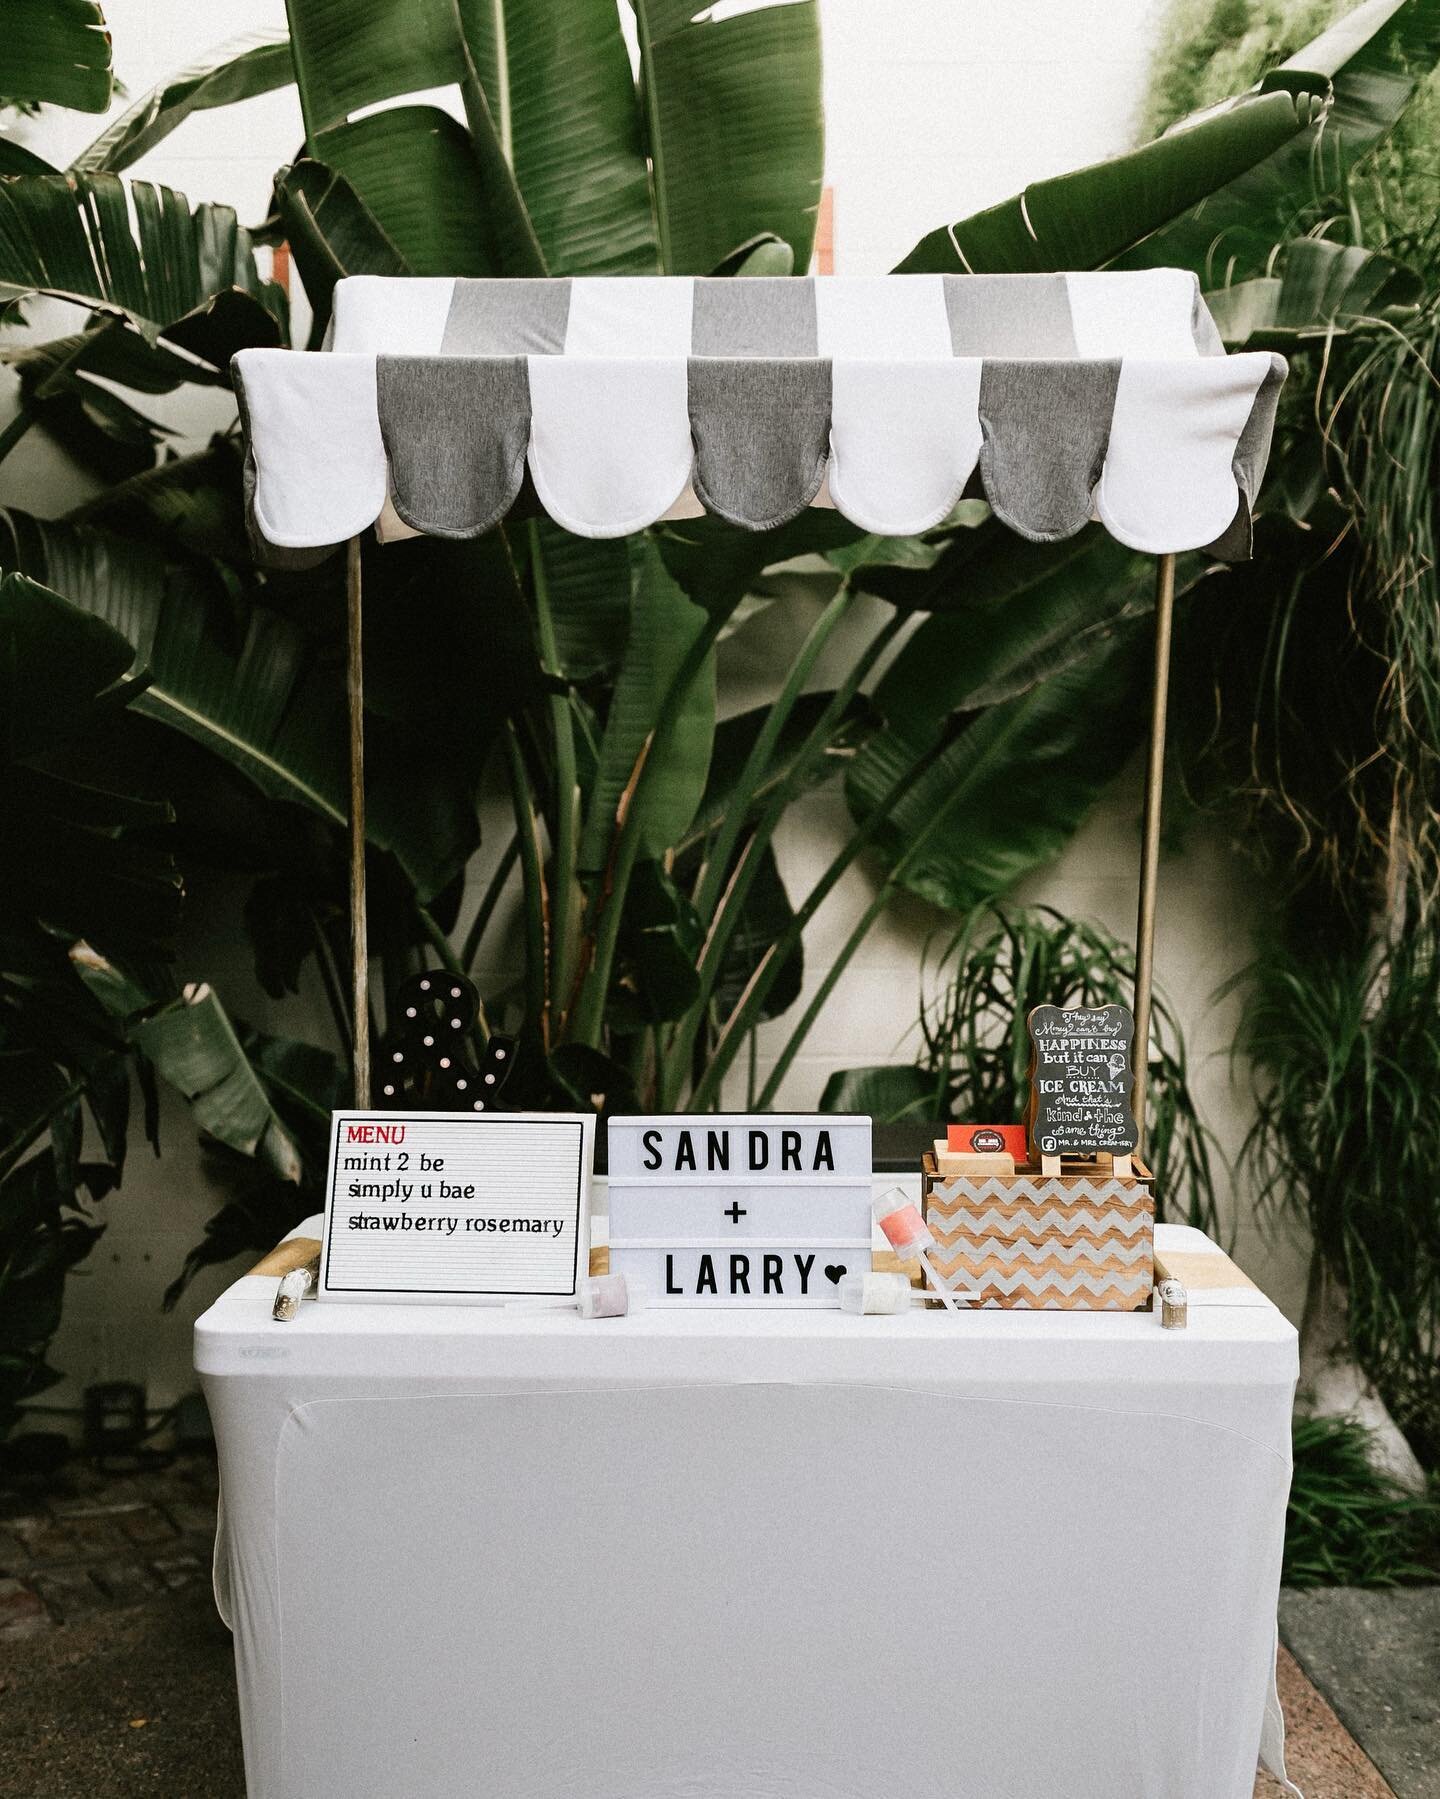 You can find our LLC team at the icecream station. 🍦🍦 Head to our blog for unique wedding dessert ideas. Link in bio.

Planning | Event Styling: @livelovecreate, @christineschang
Photographer: @laurenscotti
Ice Cream Station: @mmcreamery

.
.

#wed